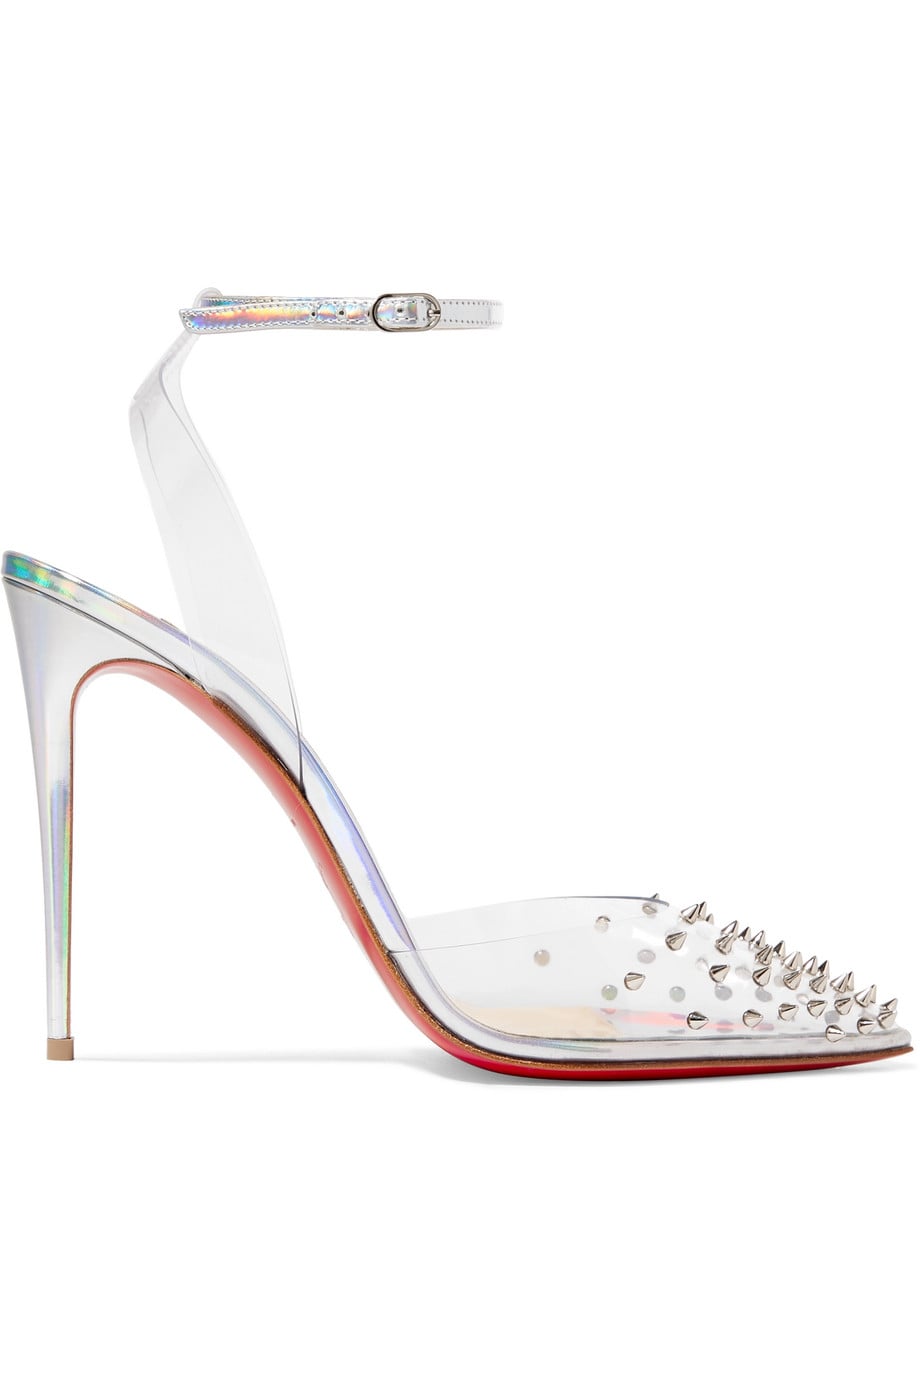 Christian Louboutin Spikoo 100 Spiked 